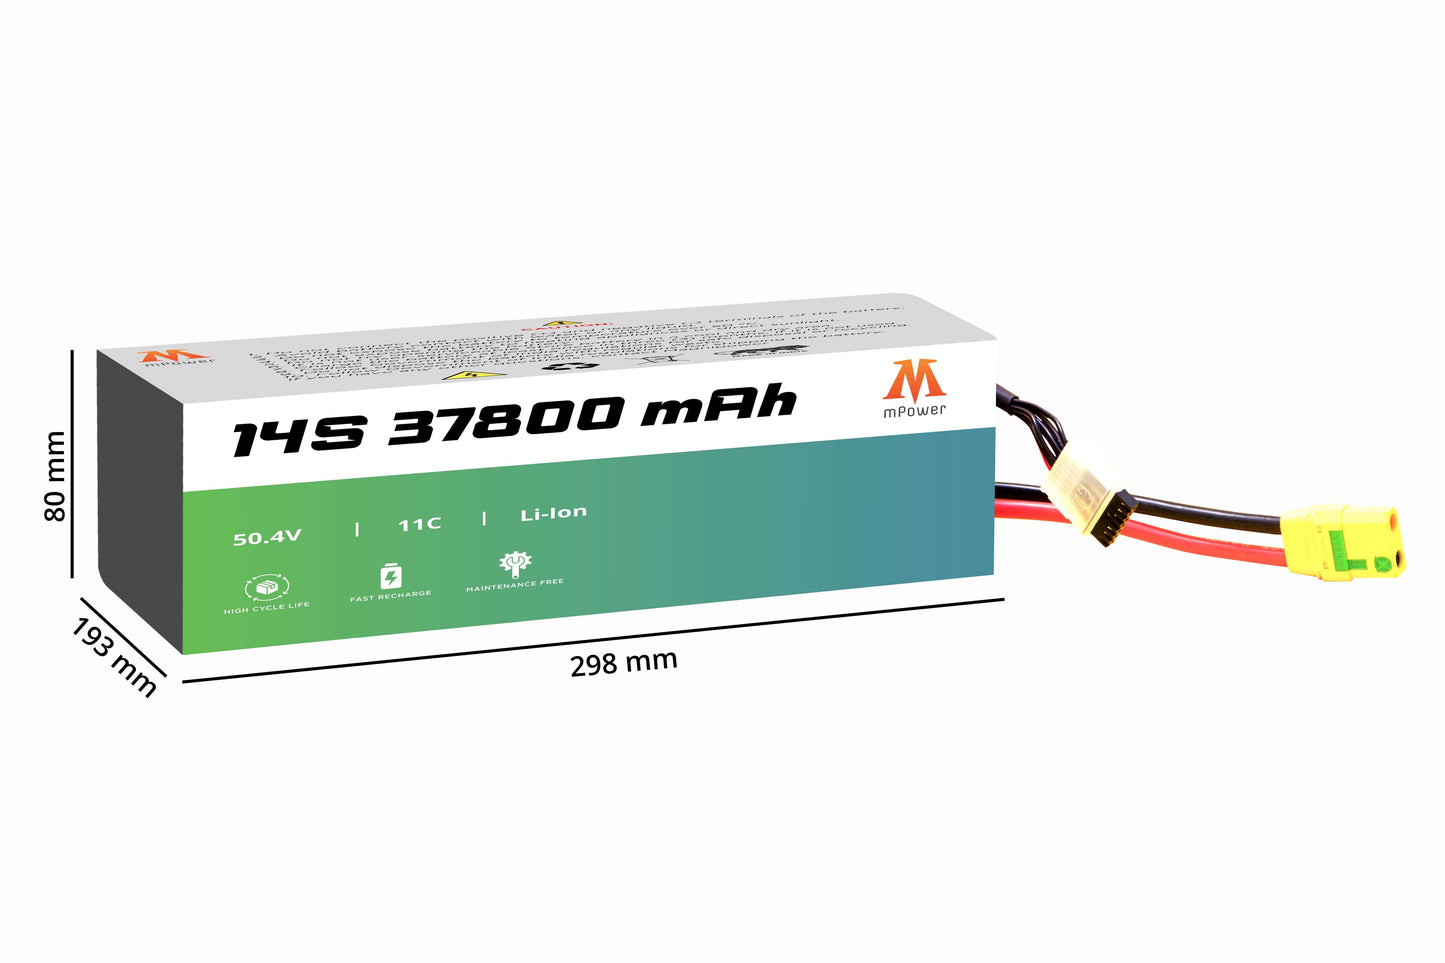 mPower 14S 37800mAh Lithium-Ion Battery for Delivery Drones